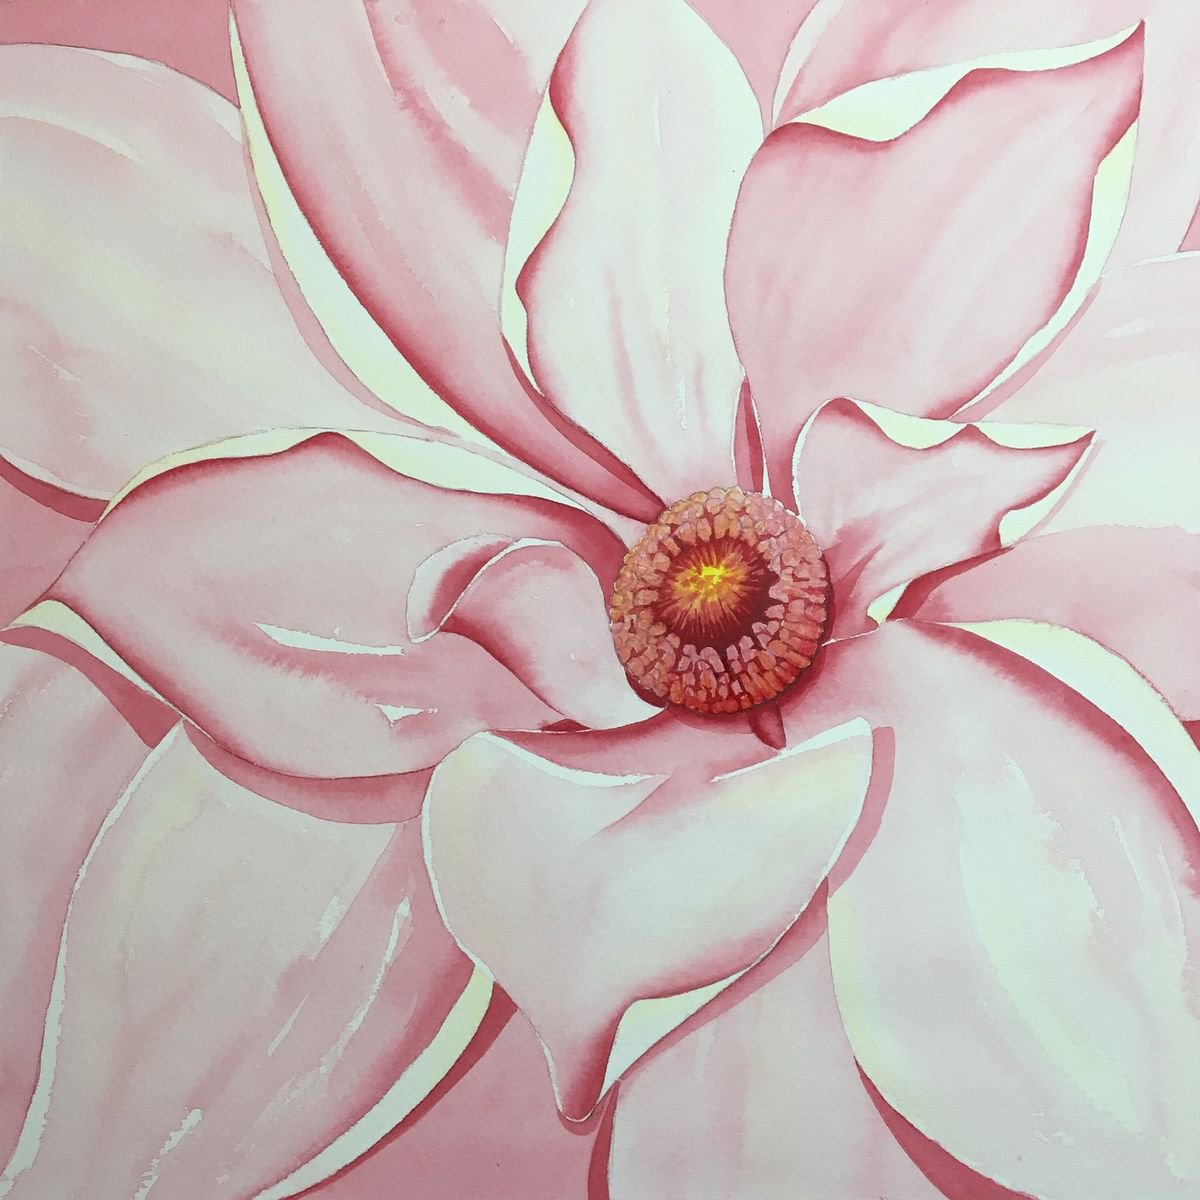 Passionate- The heART of a Flower III by Jill Griffin